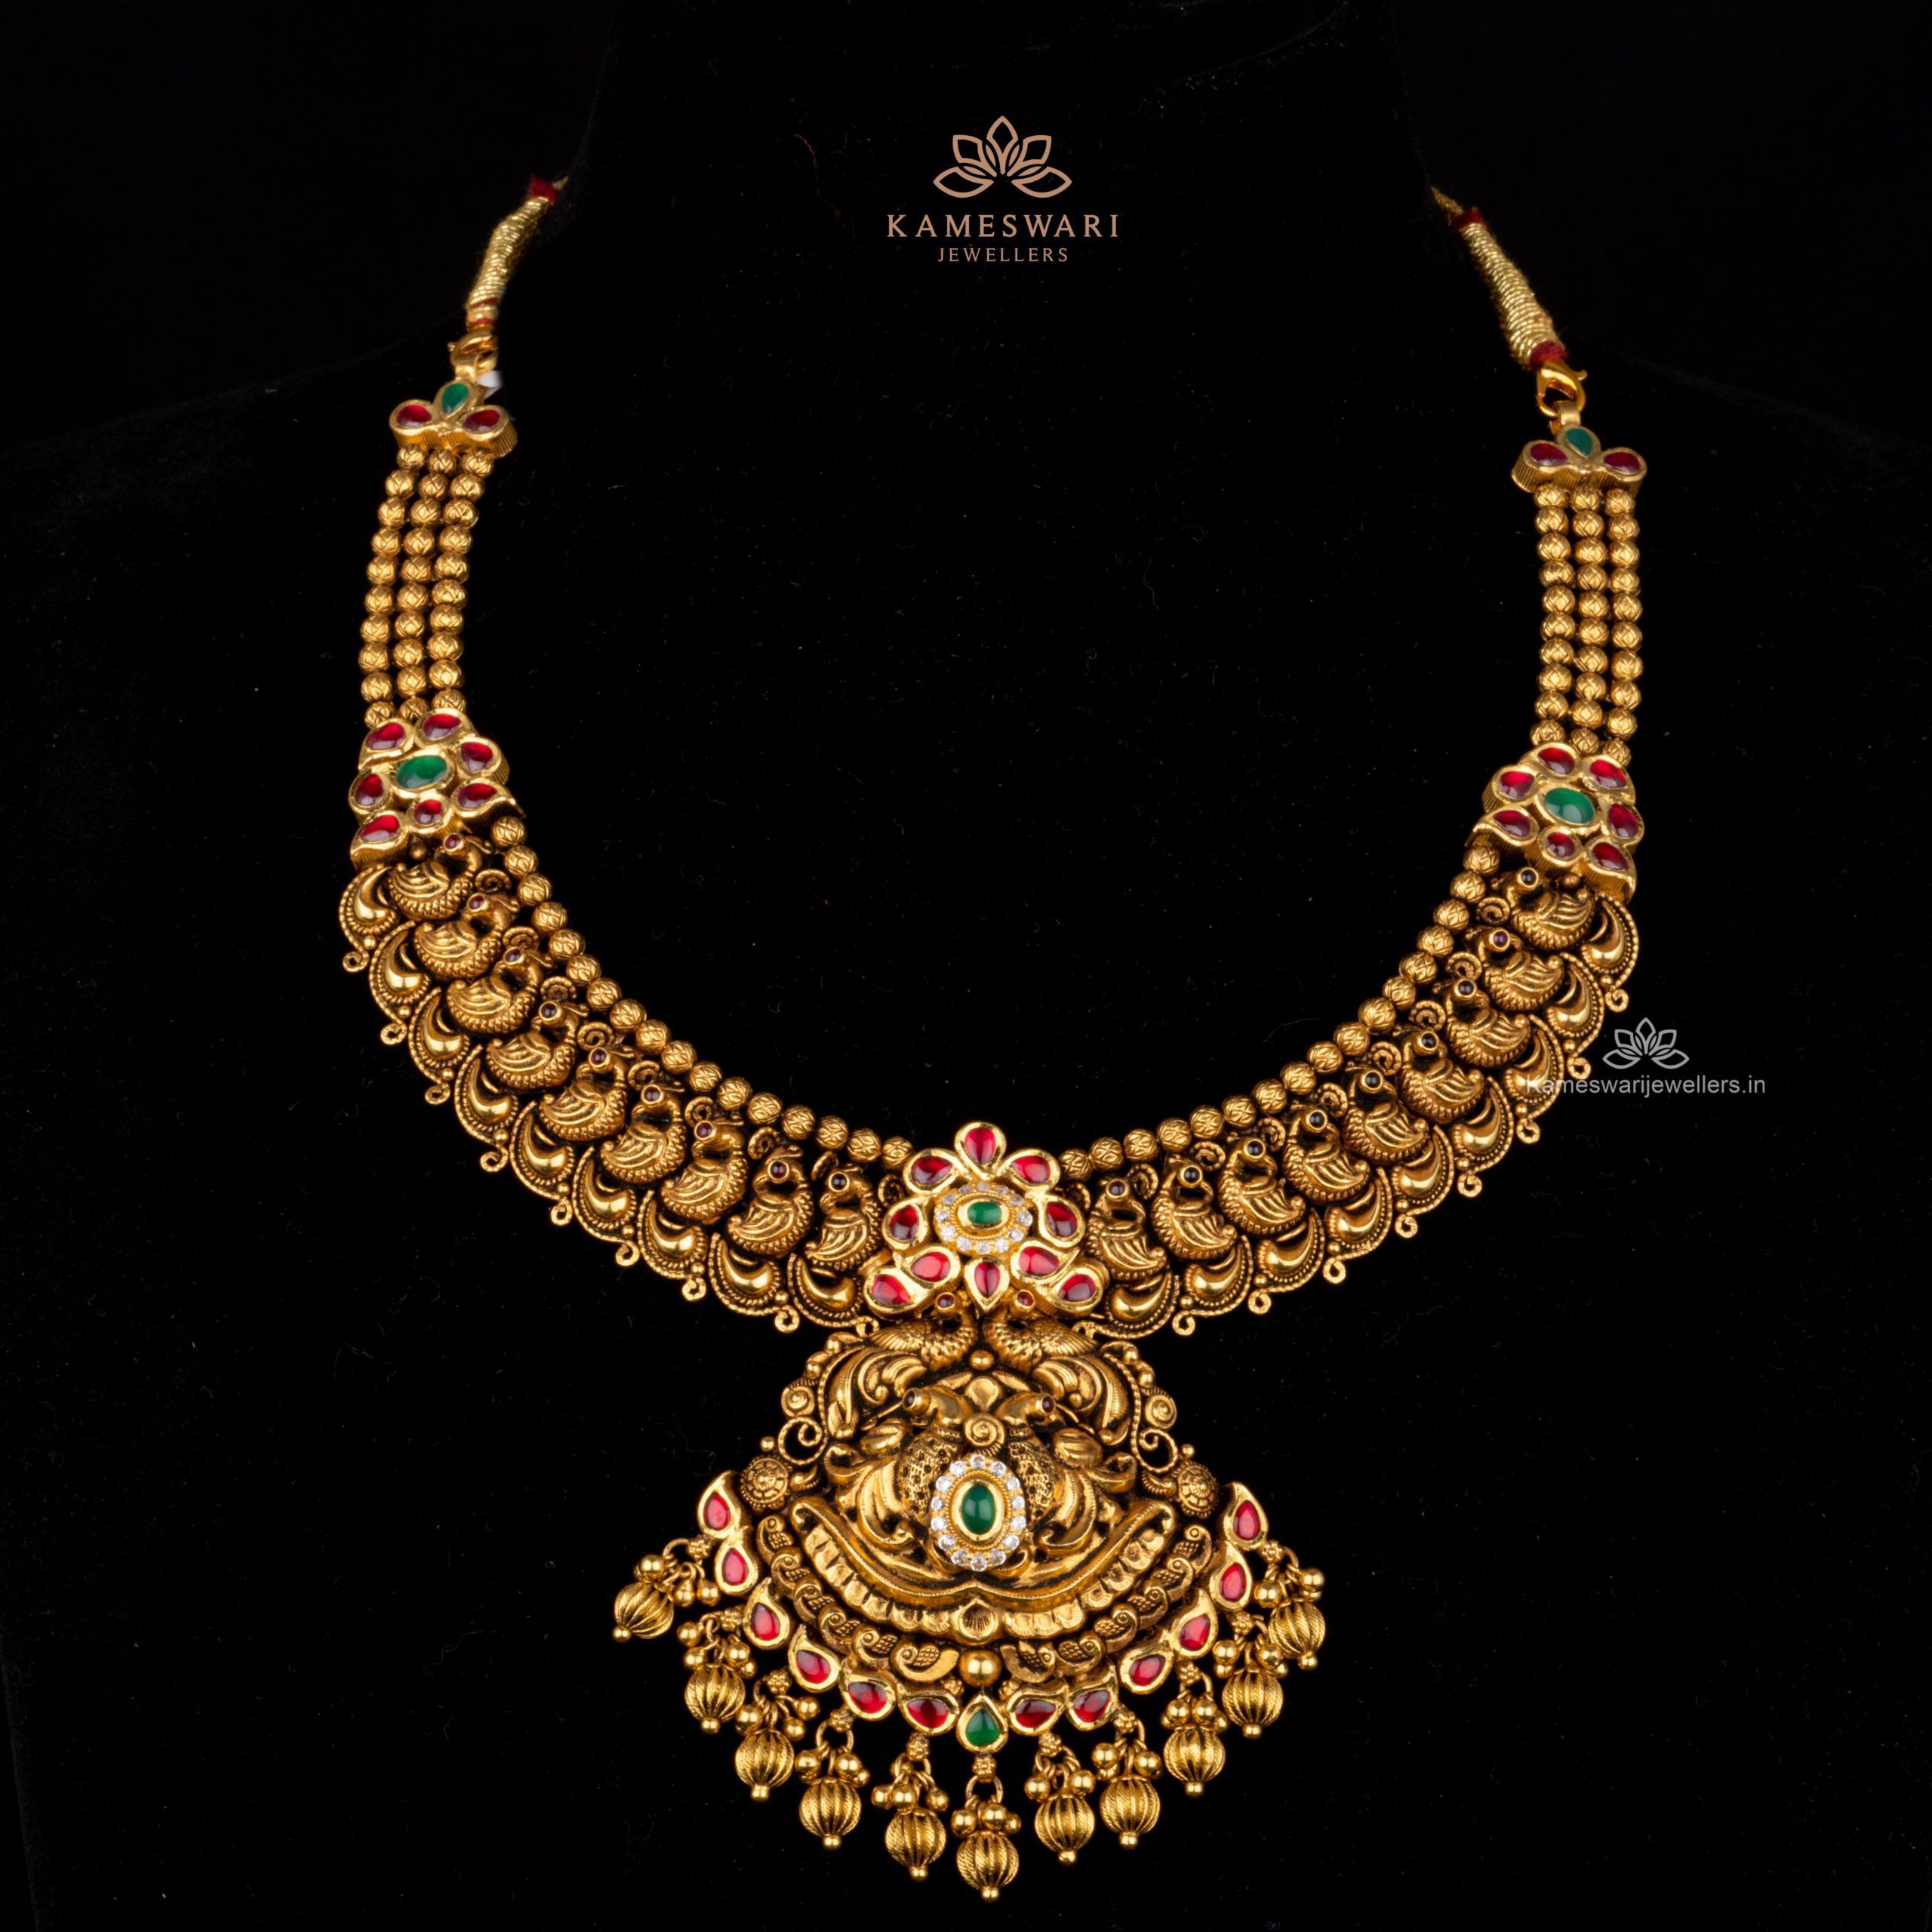 Gold Chain with Peacock Pendant - Indian Jewellery Designs